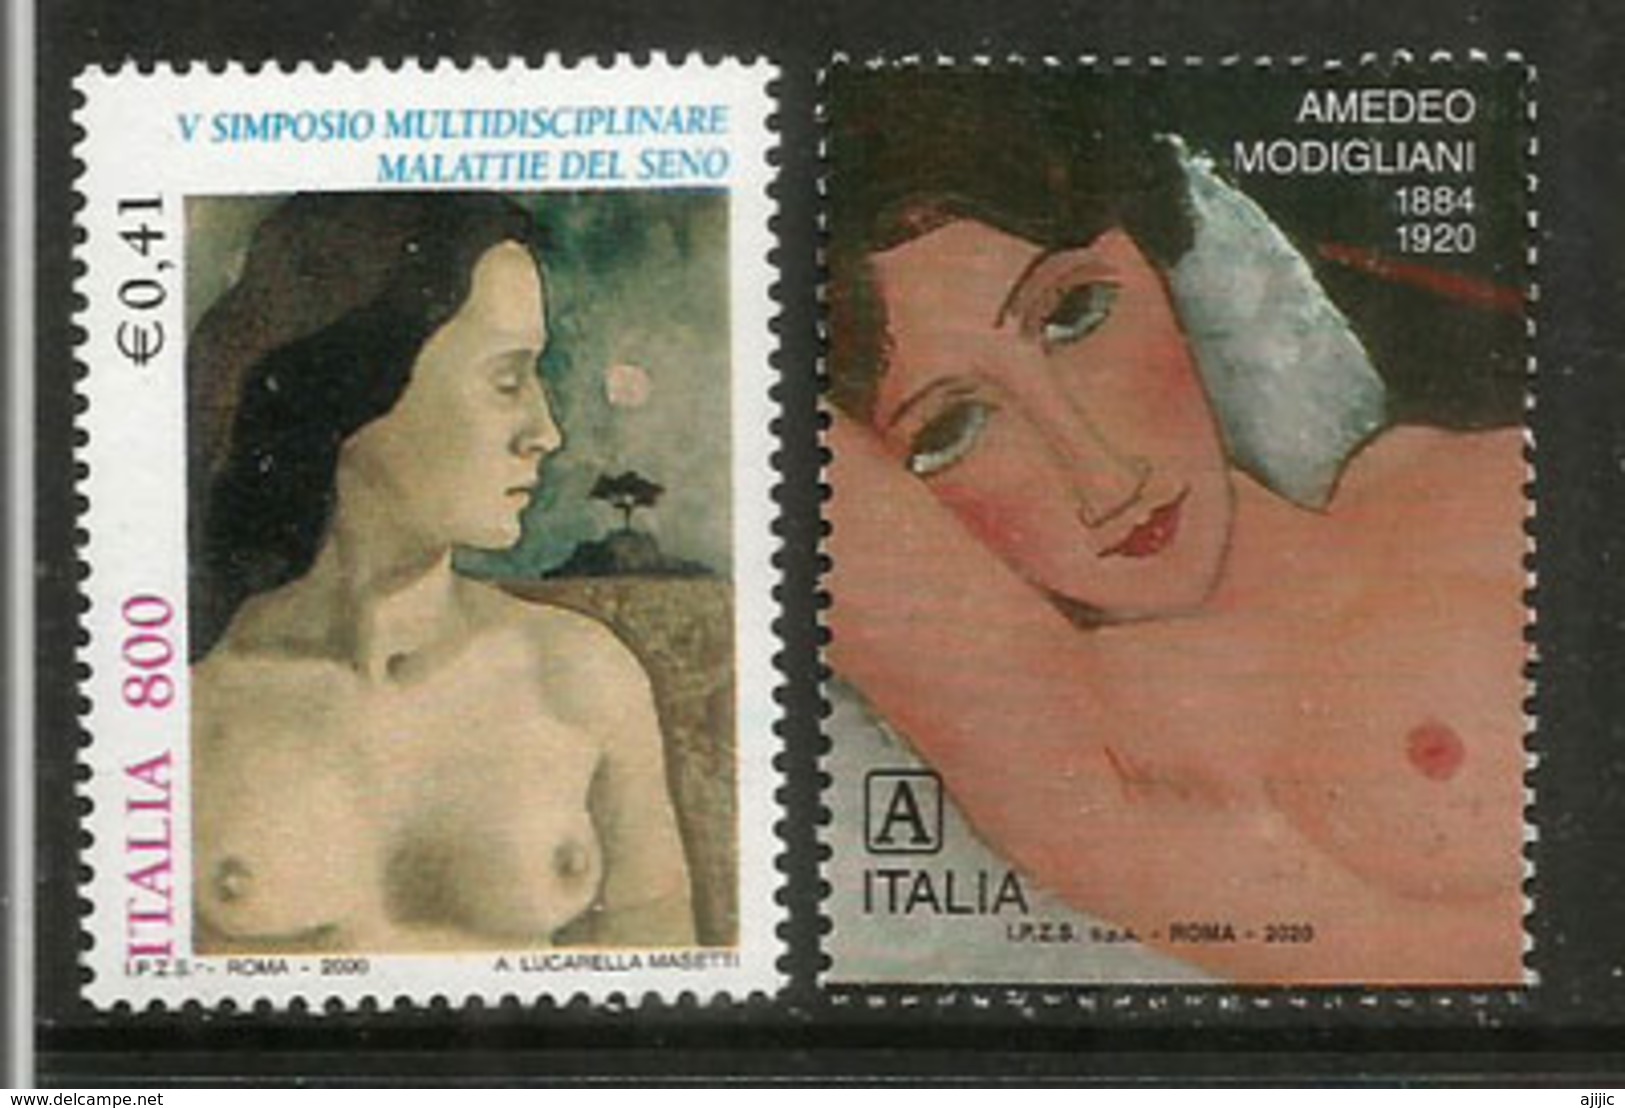 ITALY. Breast Cancer Fund Fight & Young Woman By Amedeo Modigliani 2020 + Lucarella Masetti Mint Stamp ** - Medicina